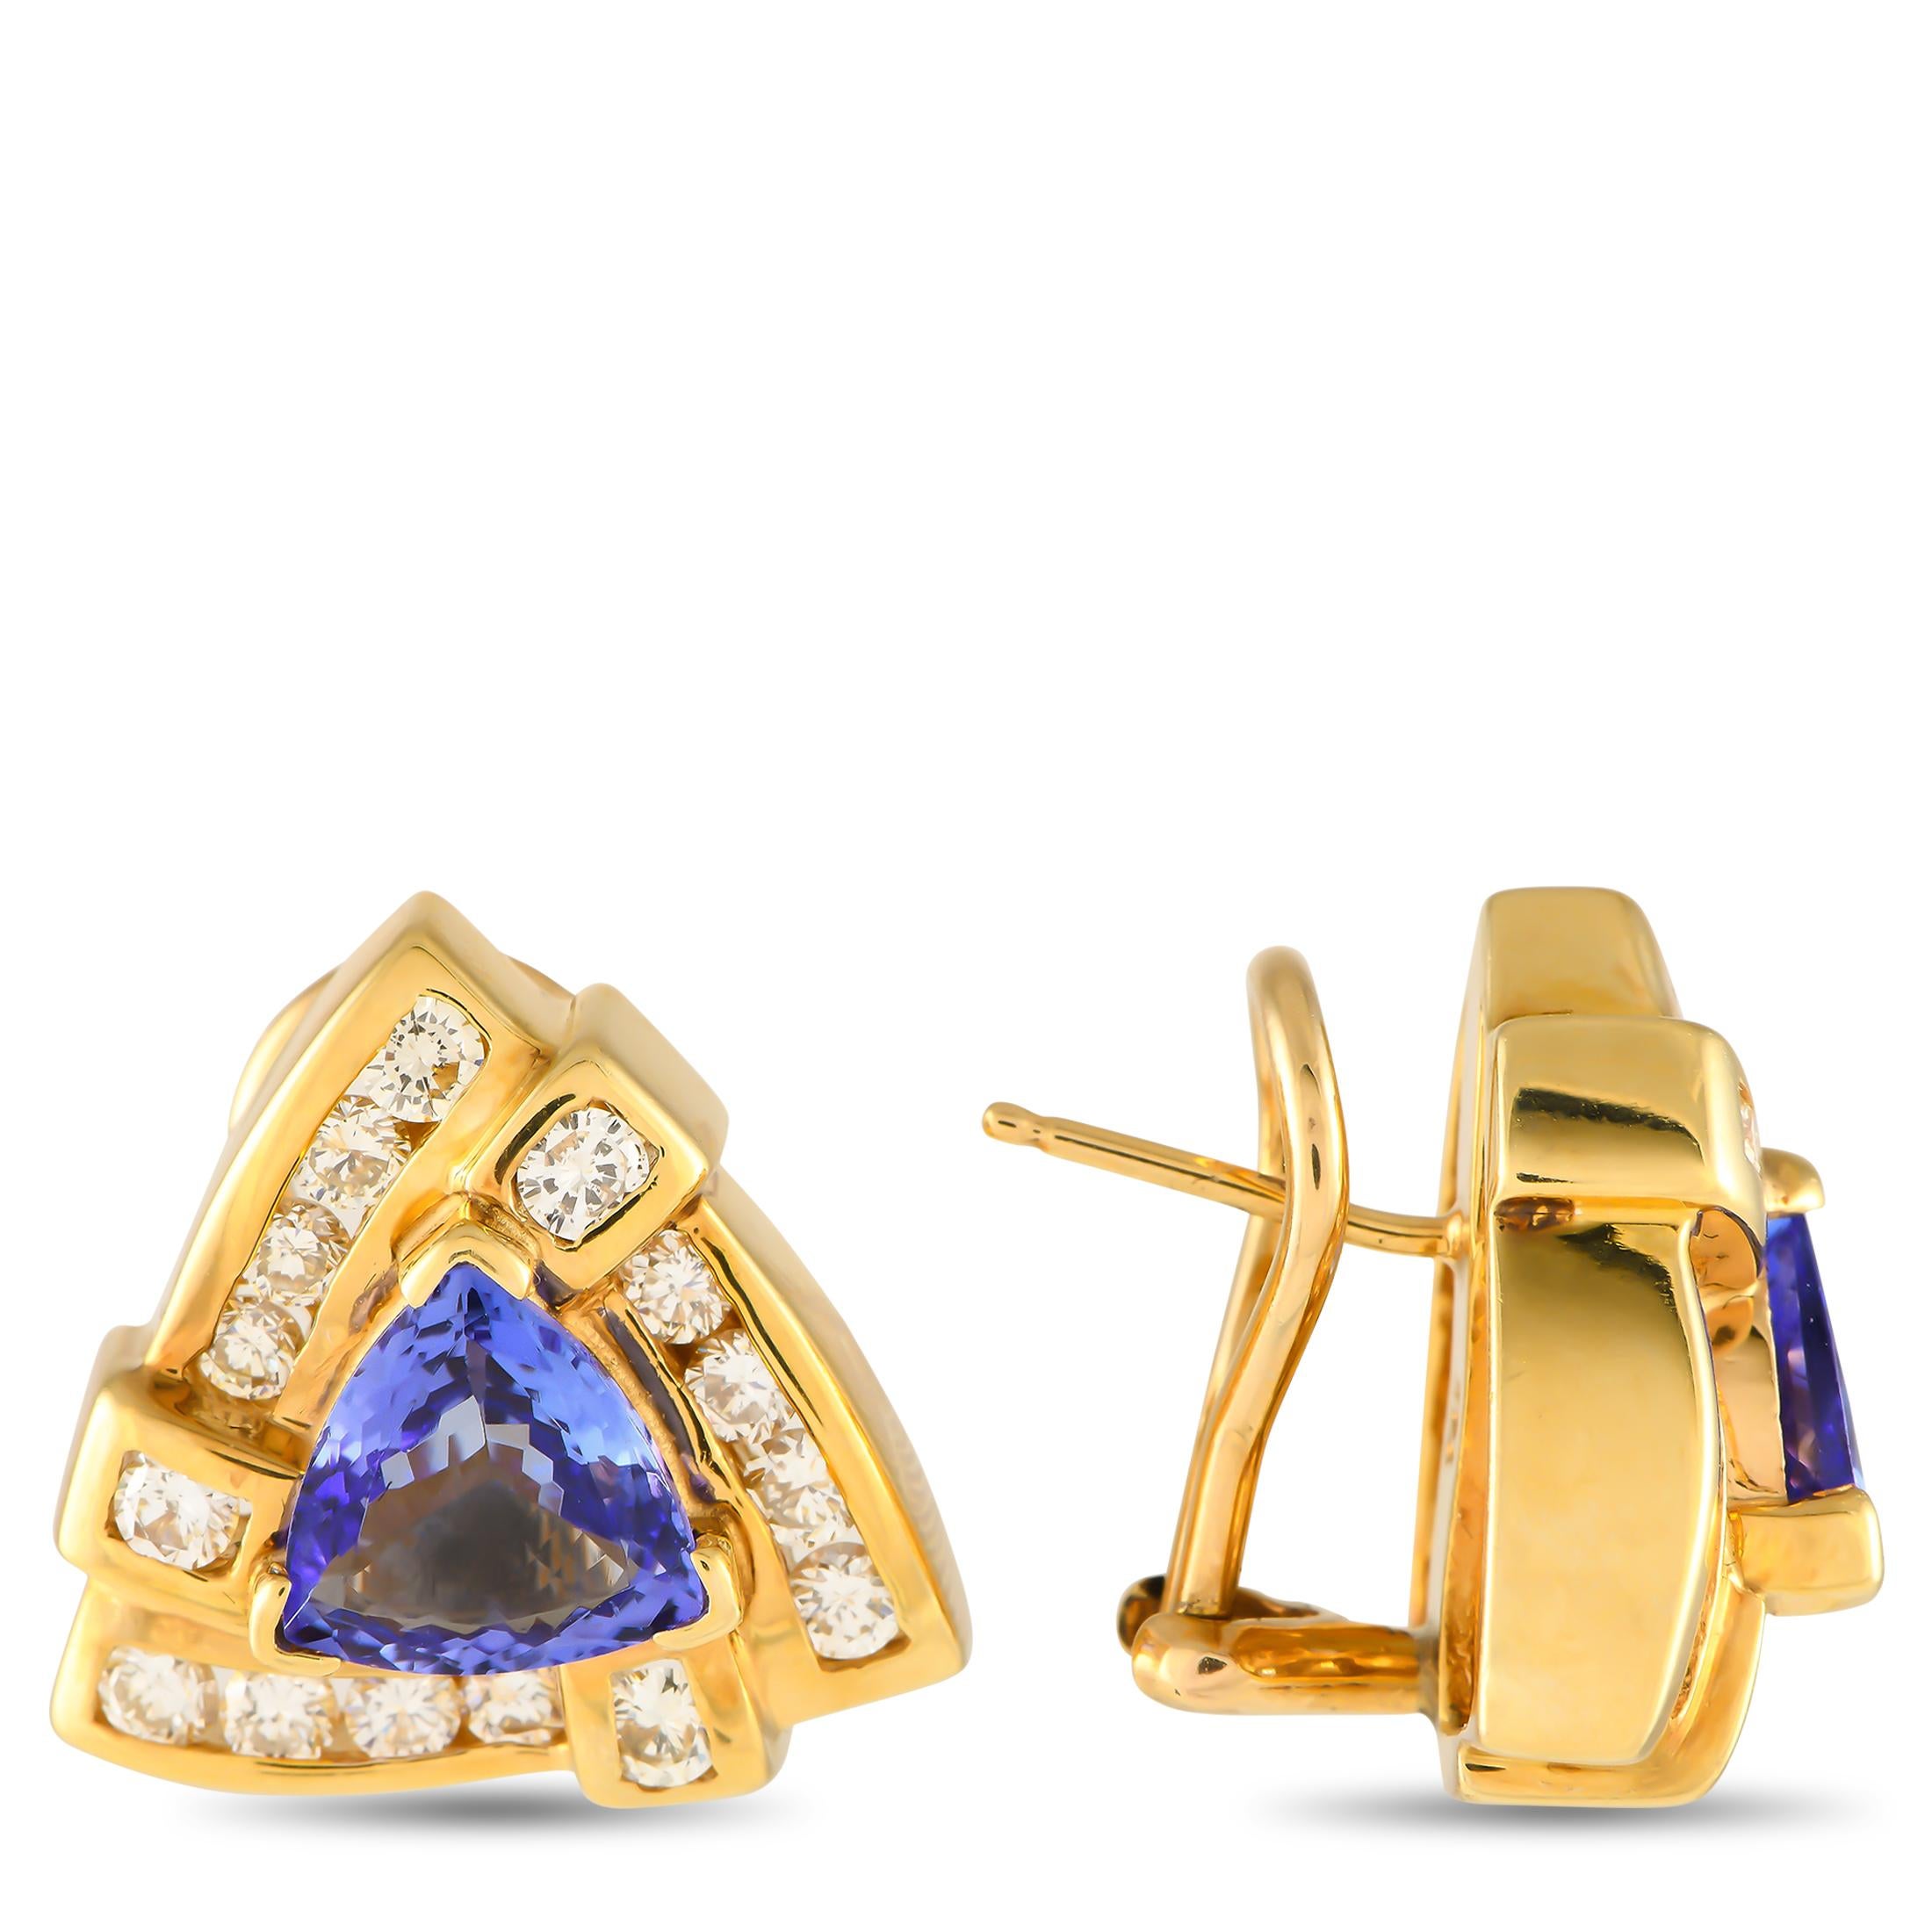 Triangular Tanzanite center stones with a total weight of 3.25 carats ensure these earrings always make a statement. Each earring features a 14K Yellow Gold setting measuring 0.65 long by 0.75 wide  Diamond accents totaling 2.0 carats provide a